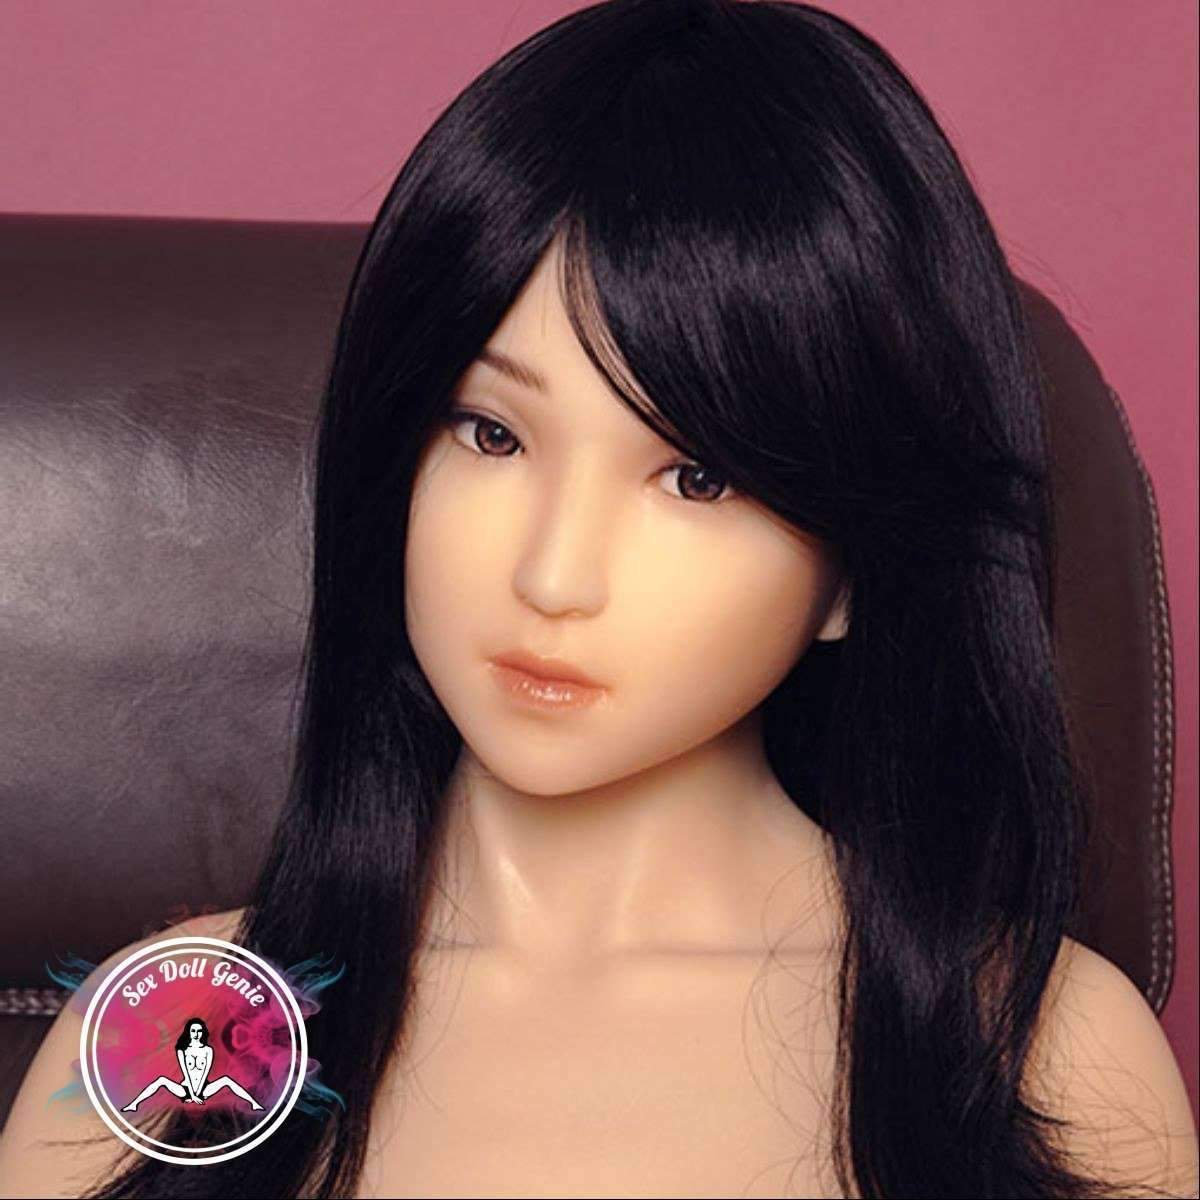 DS Doll - 163 - Emily Head - Type 1 D Cup Silicone Doll-7